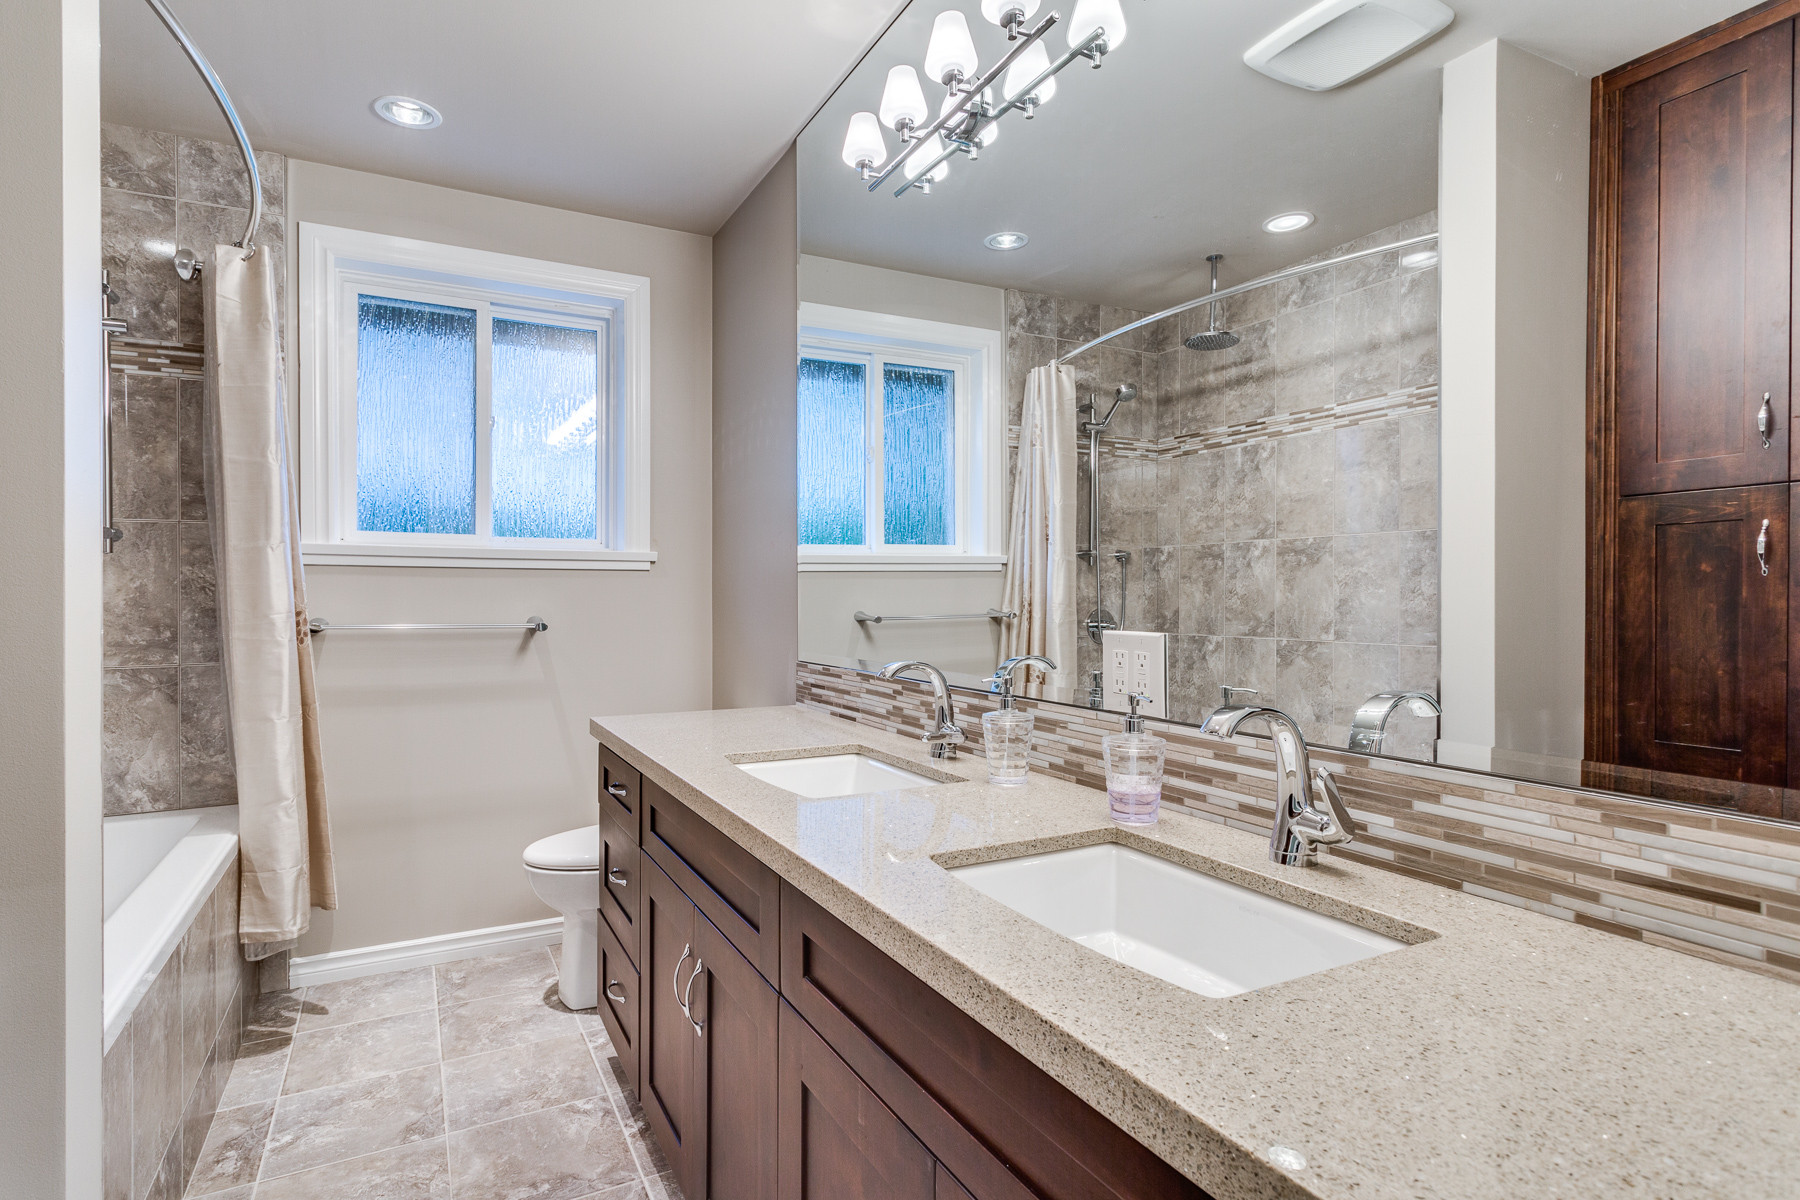 Bathroom Shower Remodel Cost
 The Cost of a Vancouver Bathroom Renovation